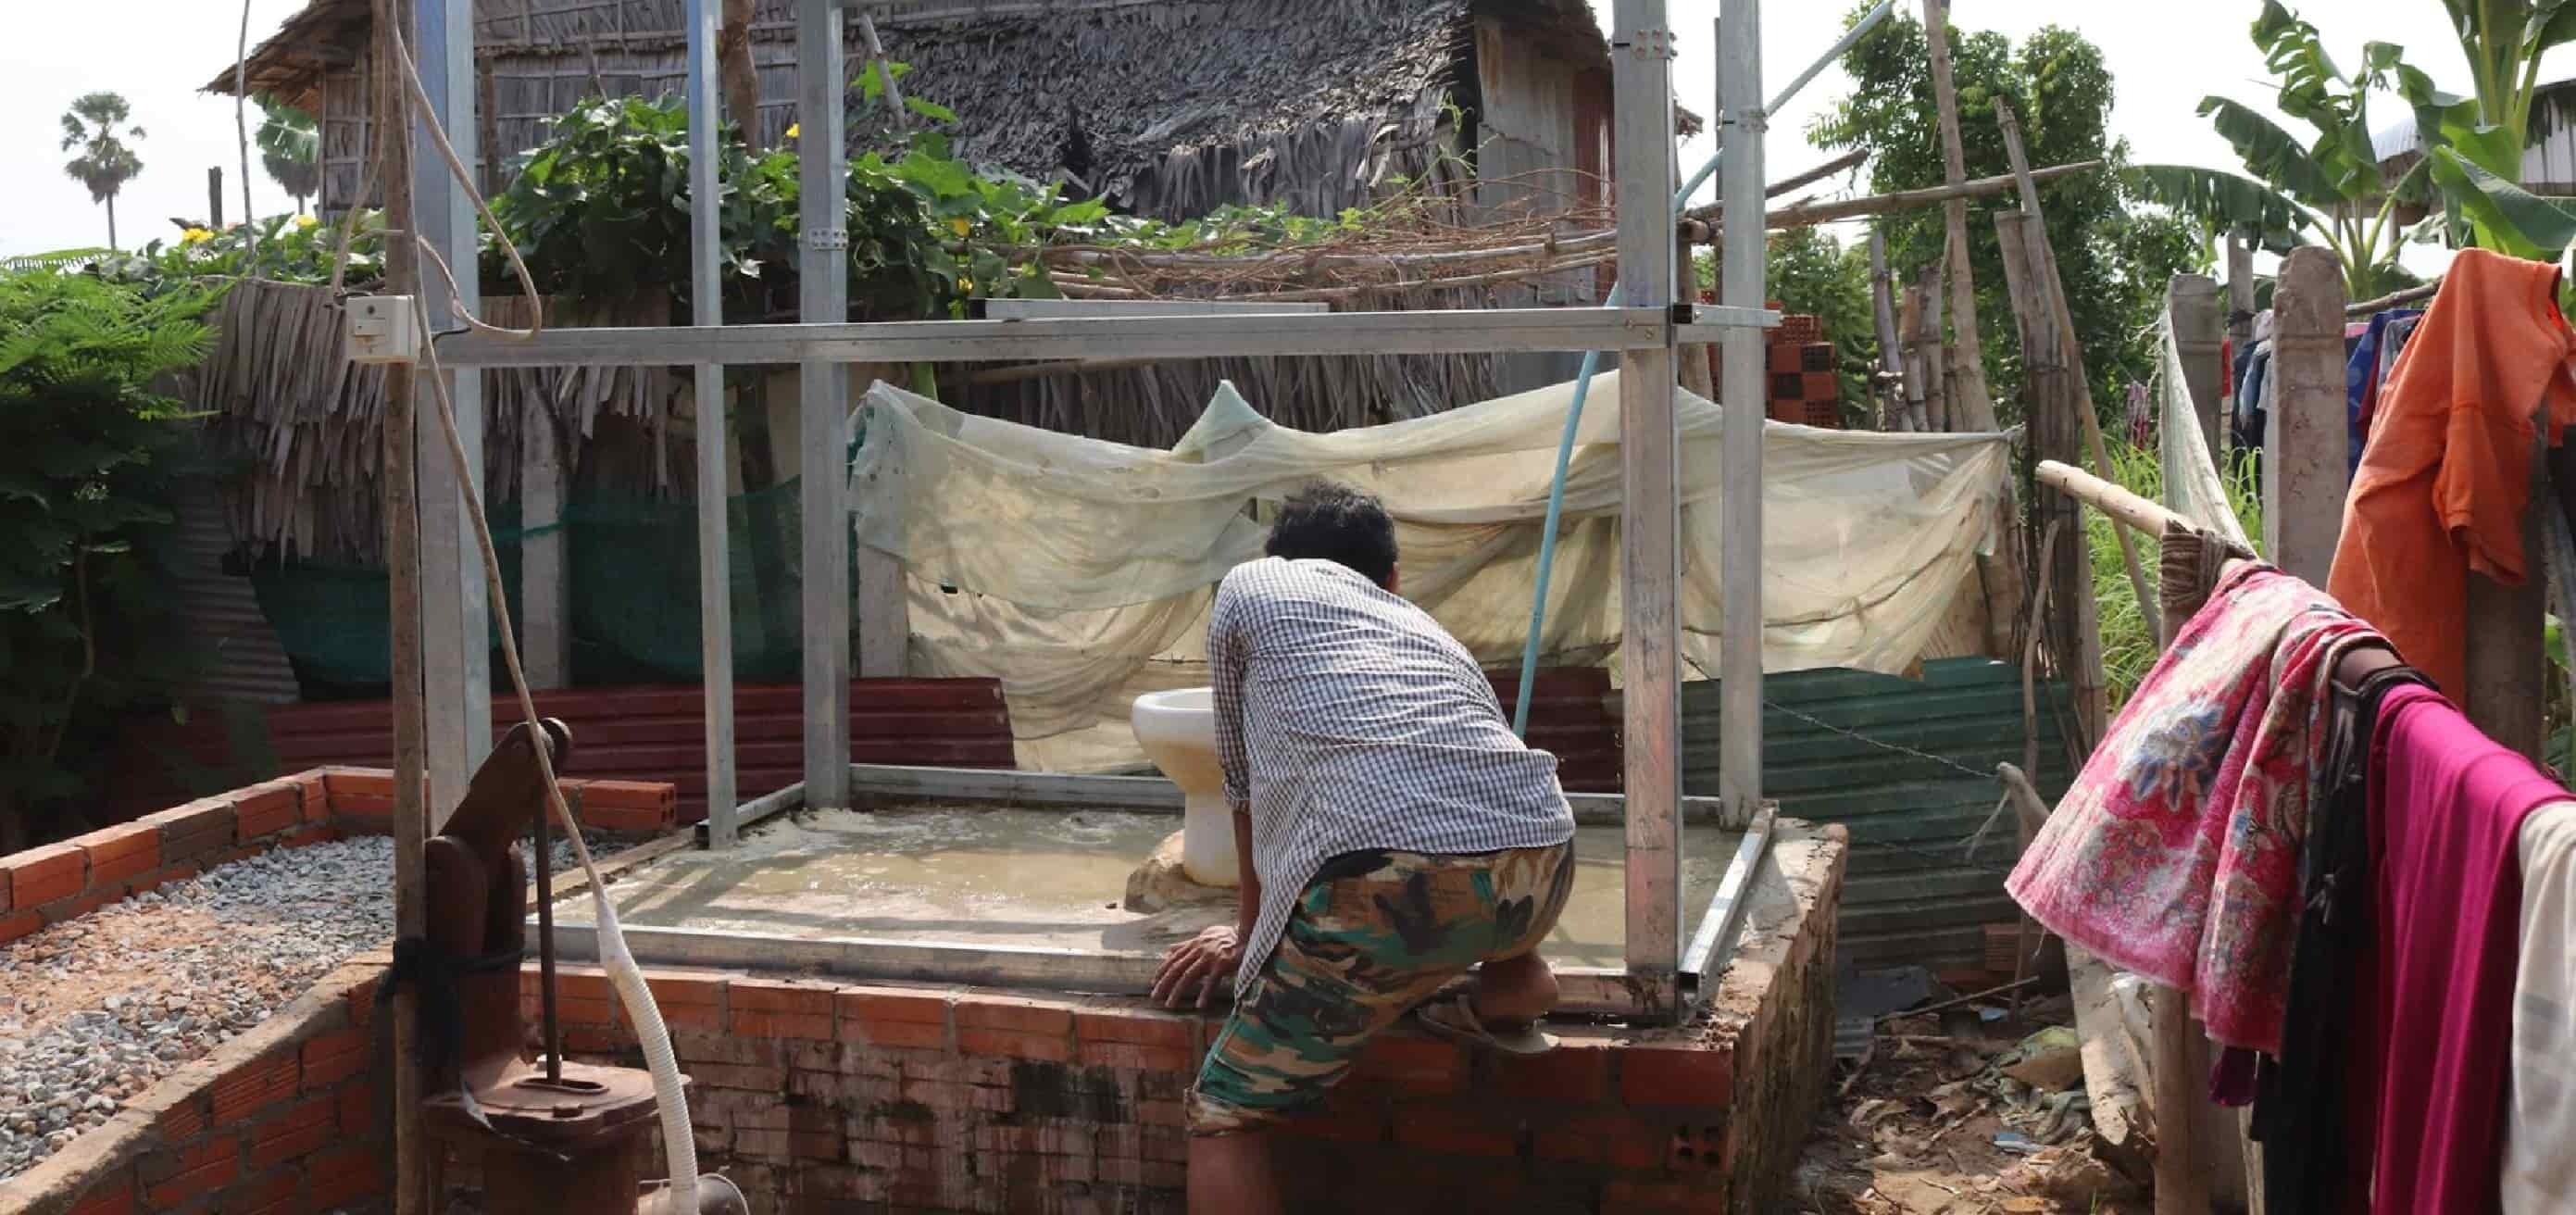 Man washing clothing outdoors in Southeast Asia